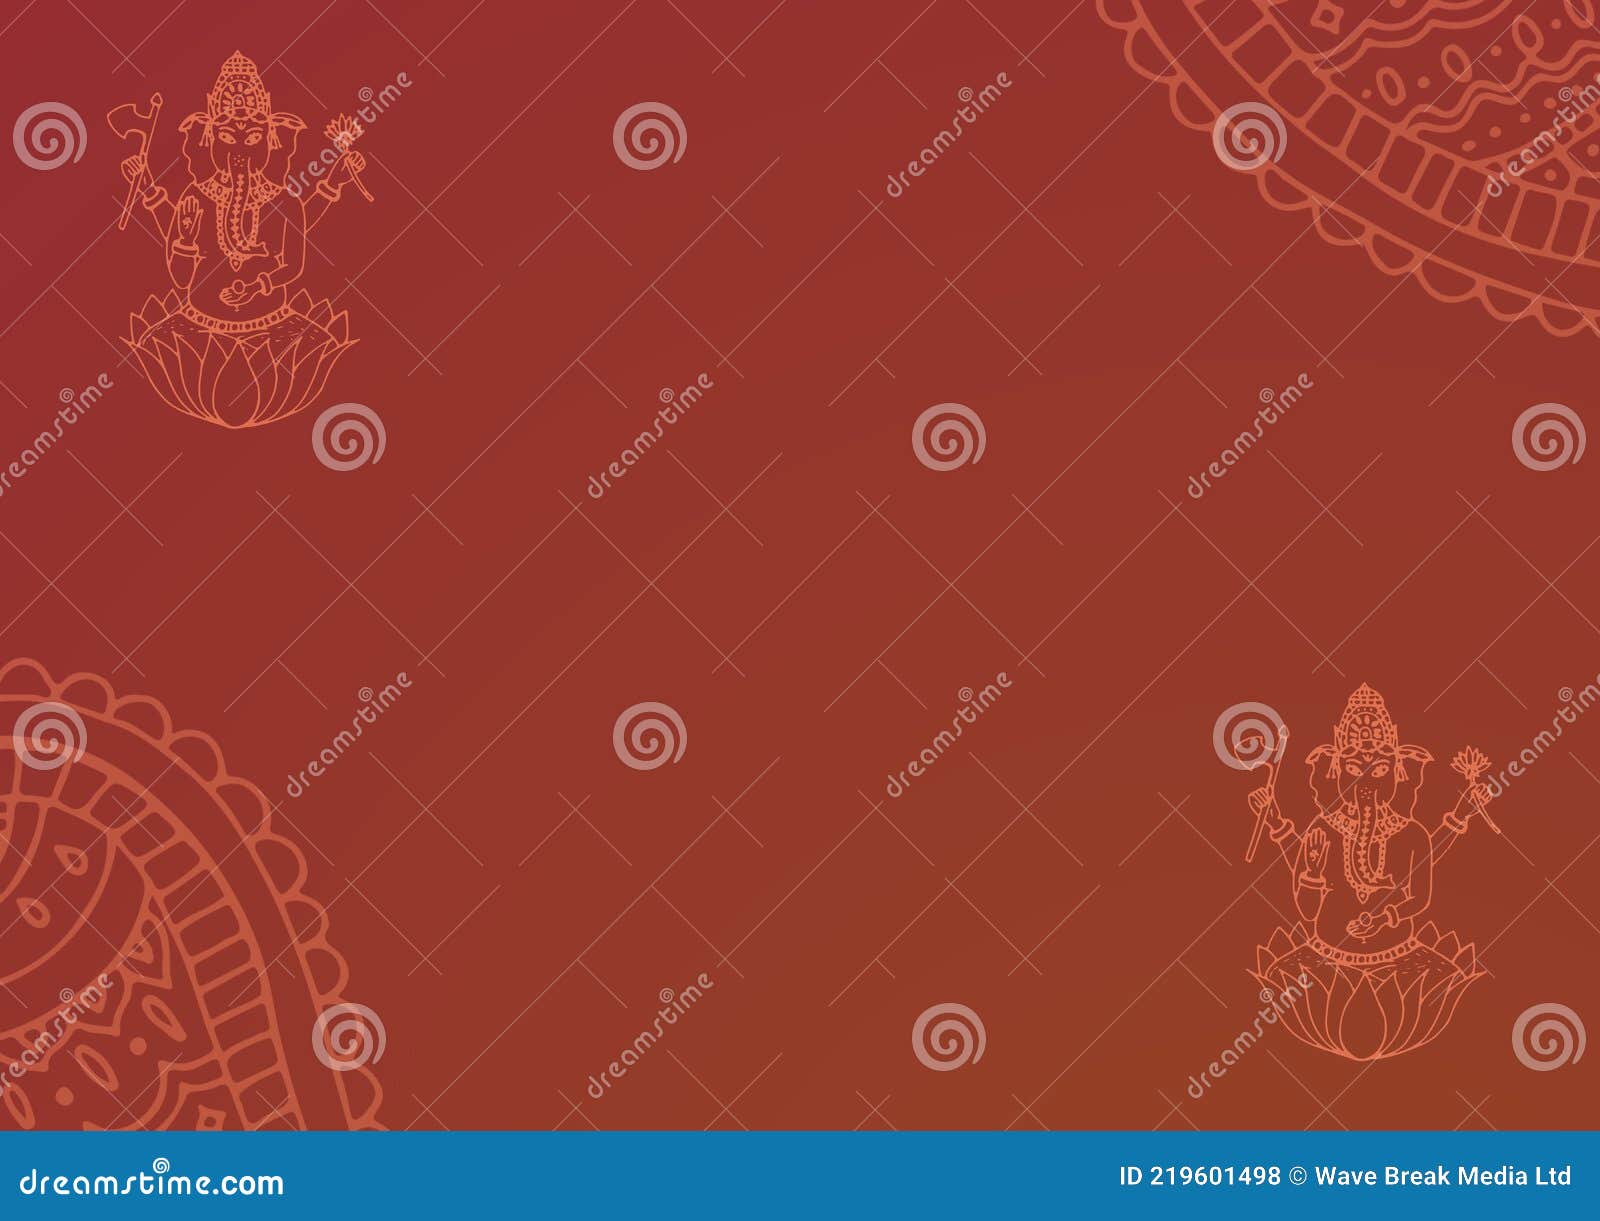 Composition of Indian Ganesh God Designs with Decorative Patterns on Brown  Background Stock Illustration - Illustration of background, template:  219601498